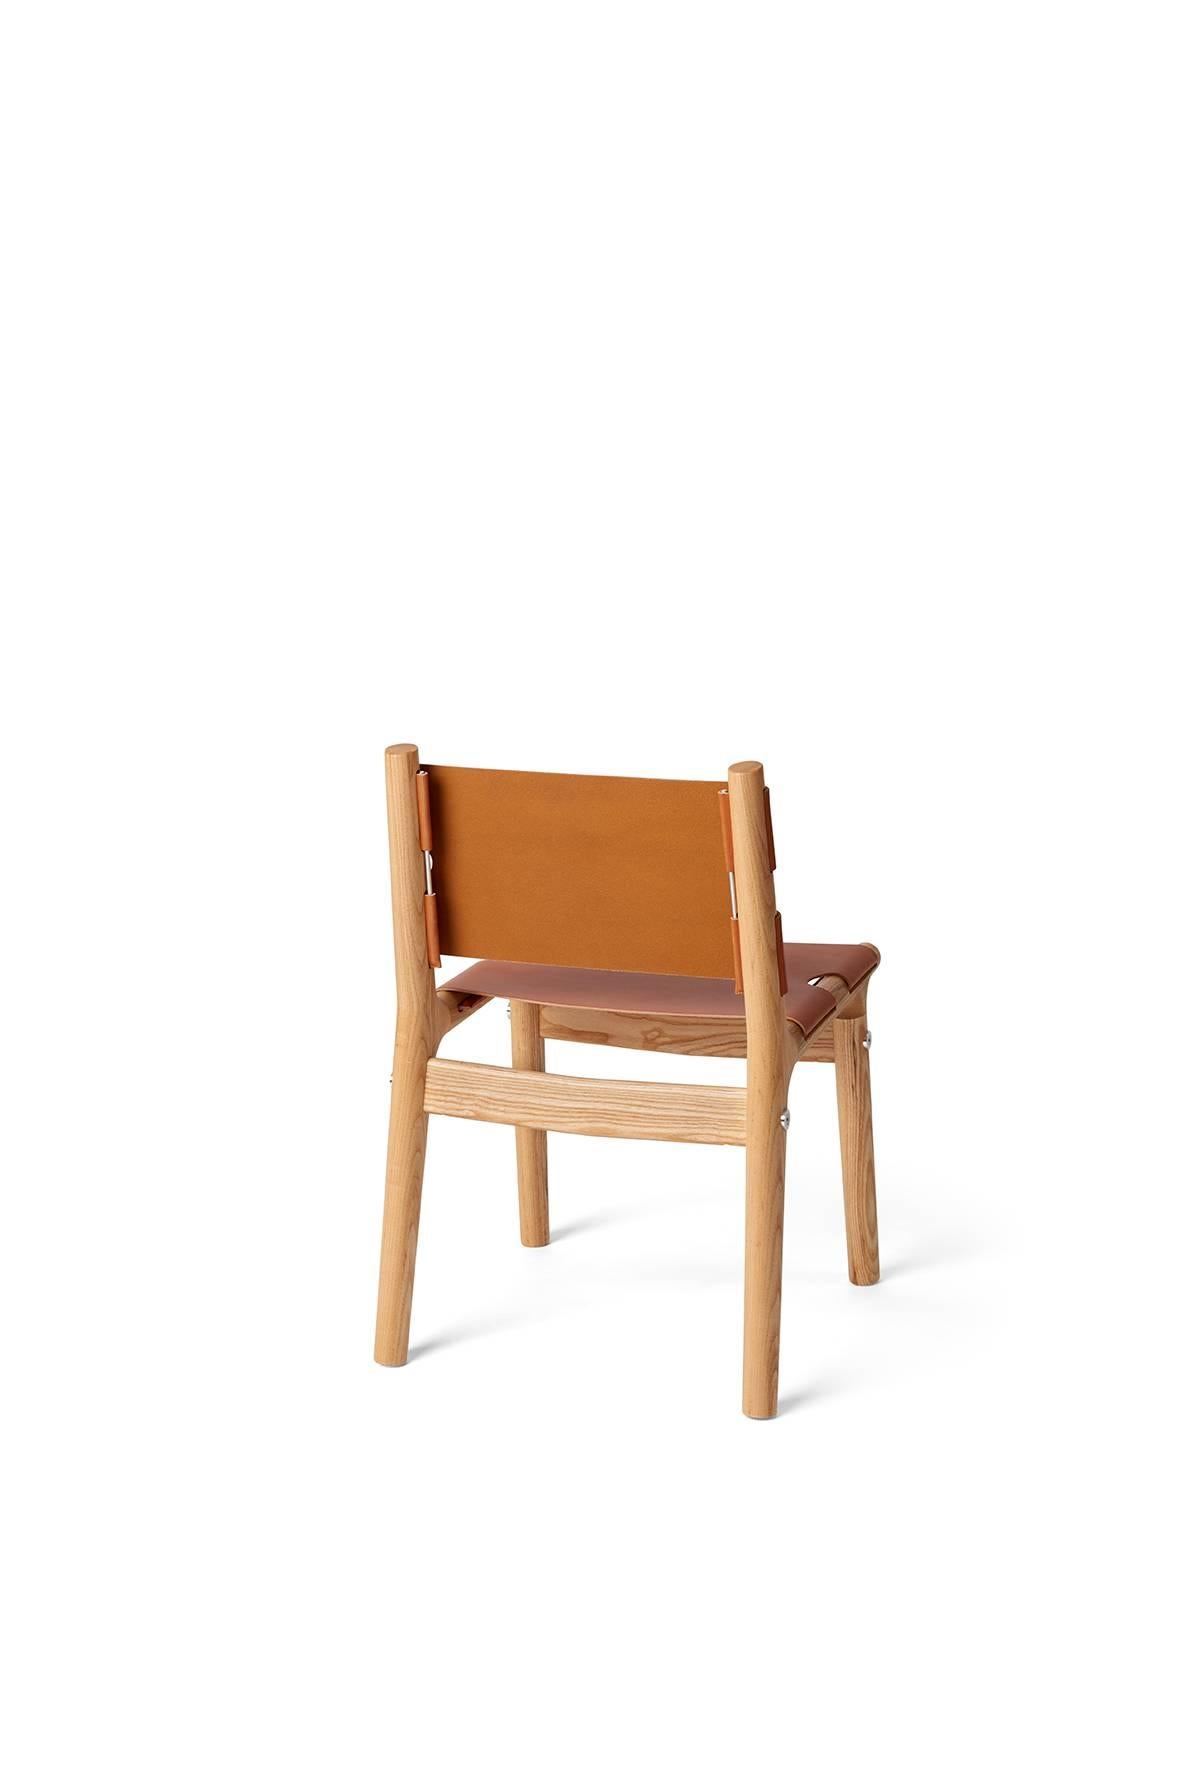 The 204 side chair has a hand-formed frame composed of North American ash with mirror-polished aluminium fittings. Its rugged harness leather slings relax to a gentle sweep, and age to a gorgeous patina with use. 

Measures: H 29.5